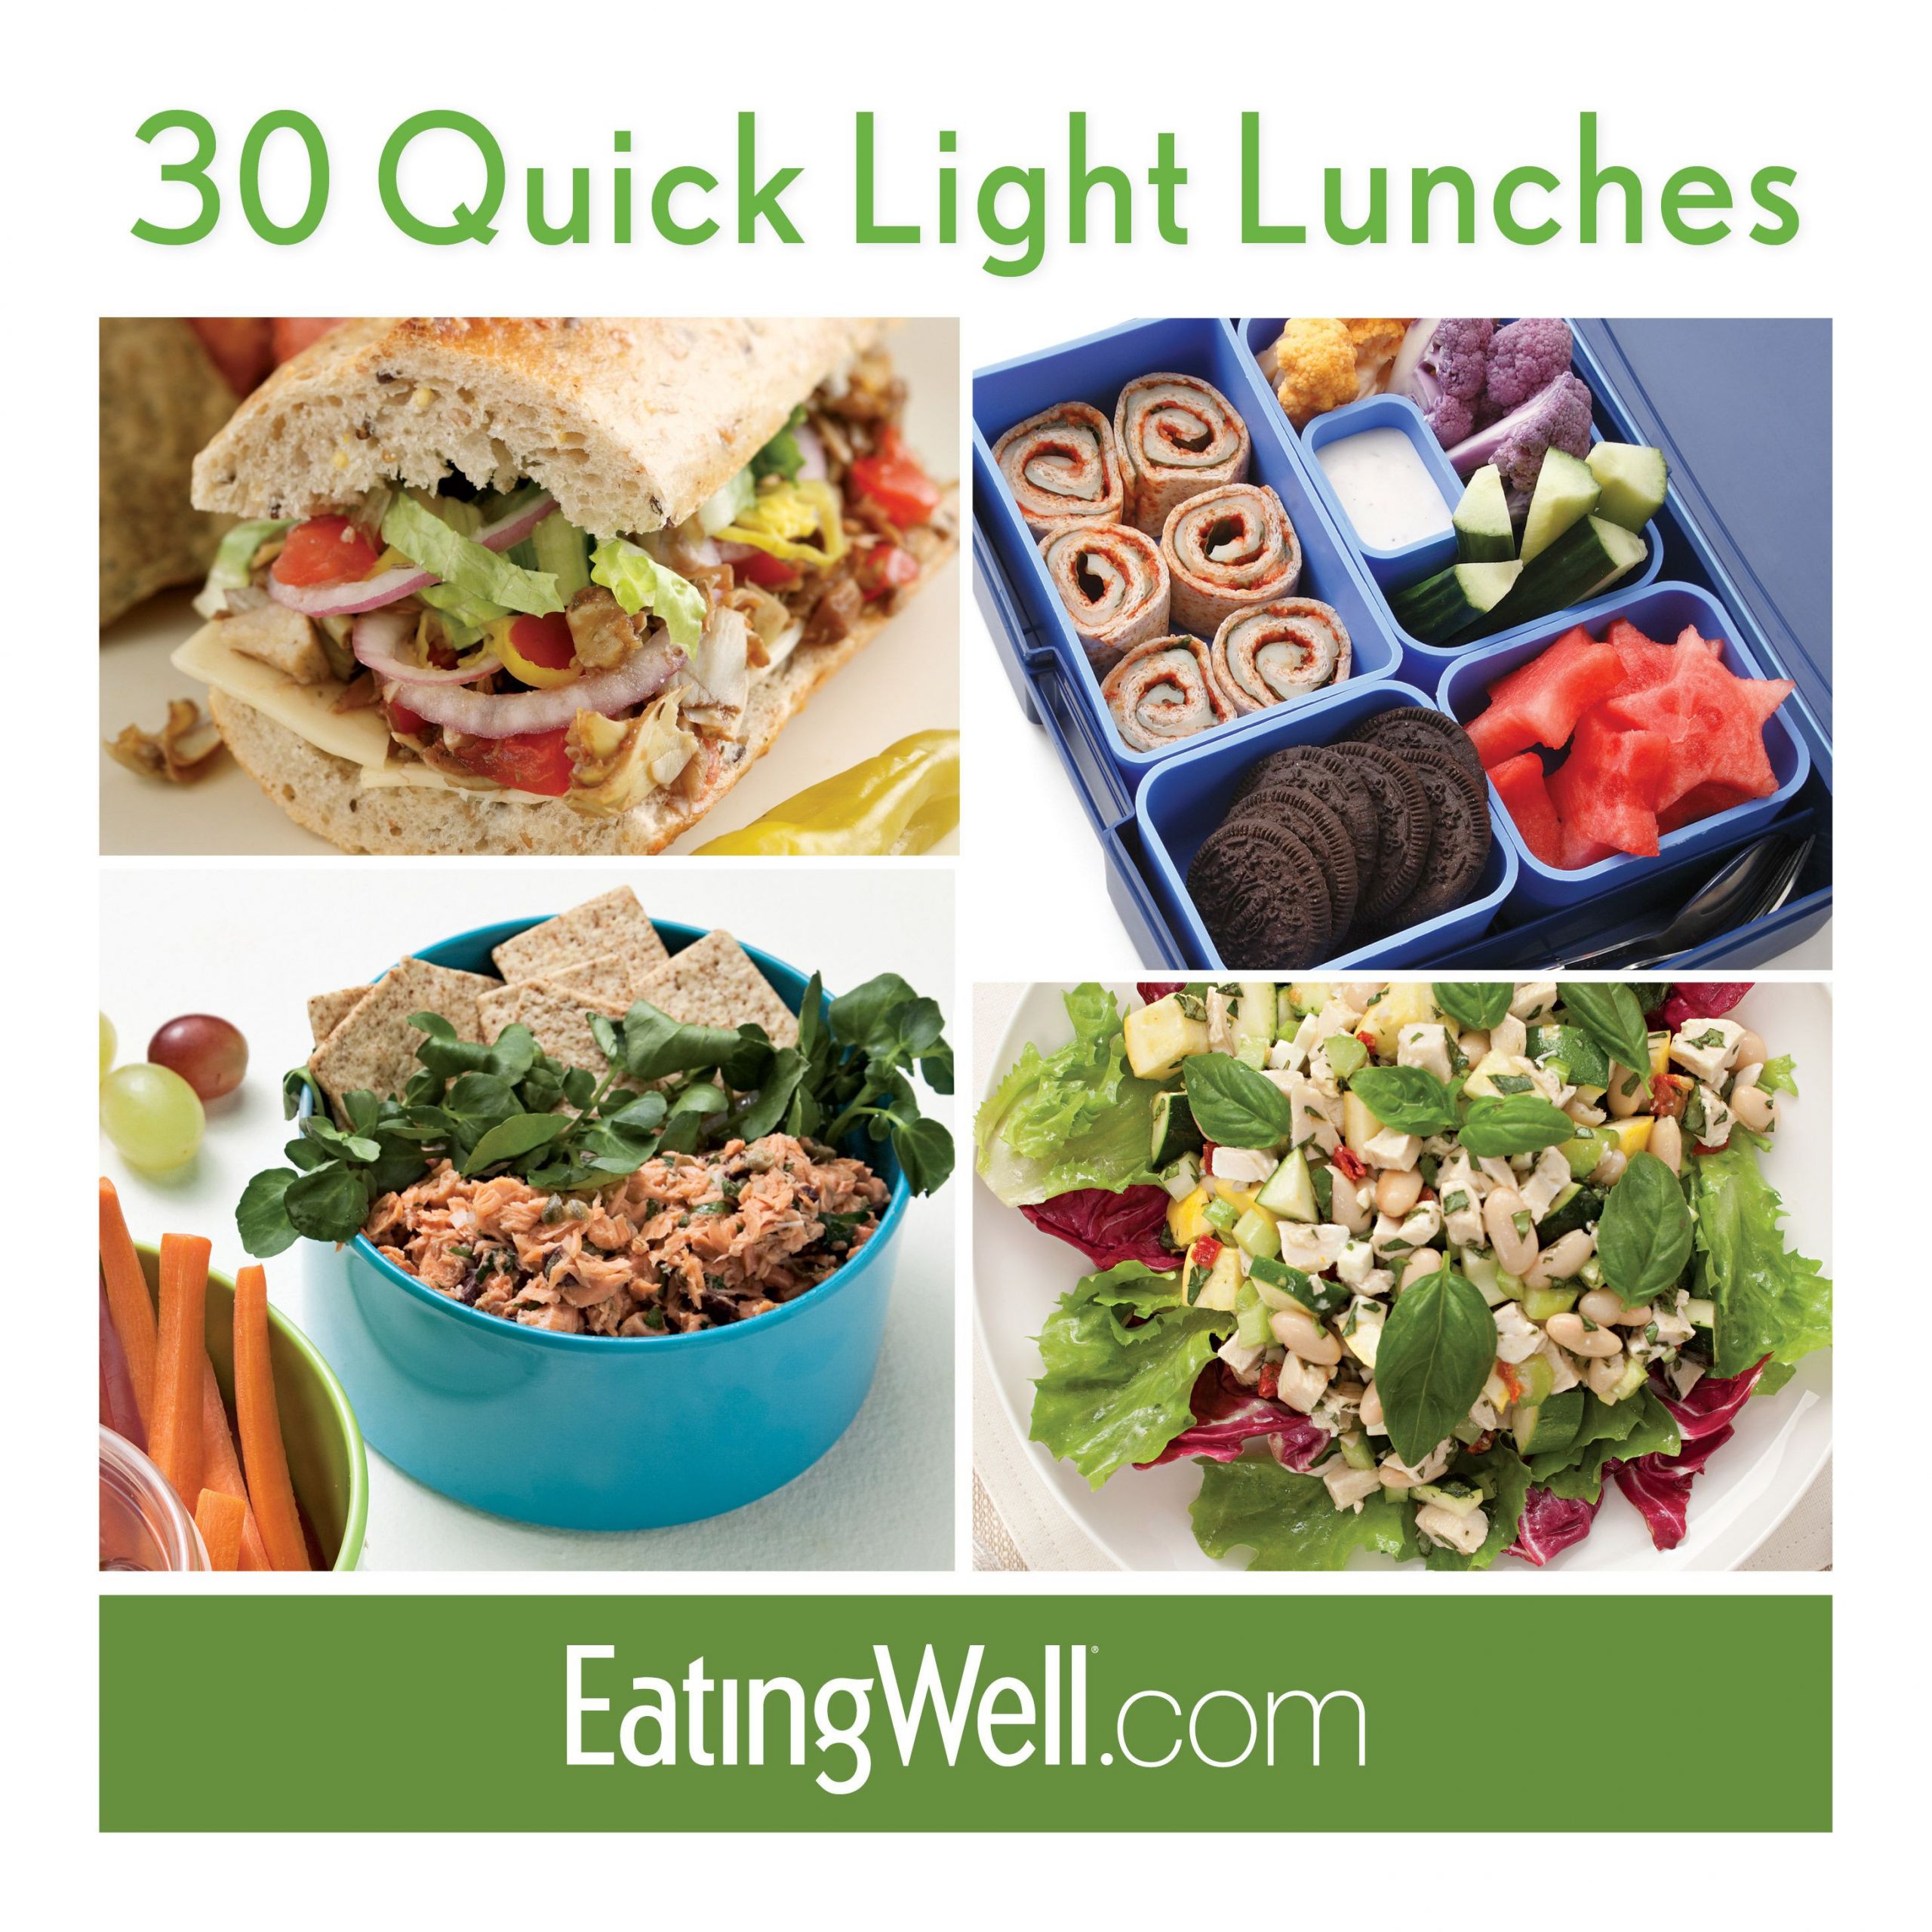 Healthy Low Calorie Lunches To Take To Work
 Quick Light Lunches